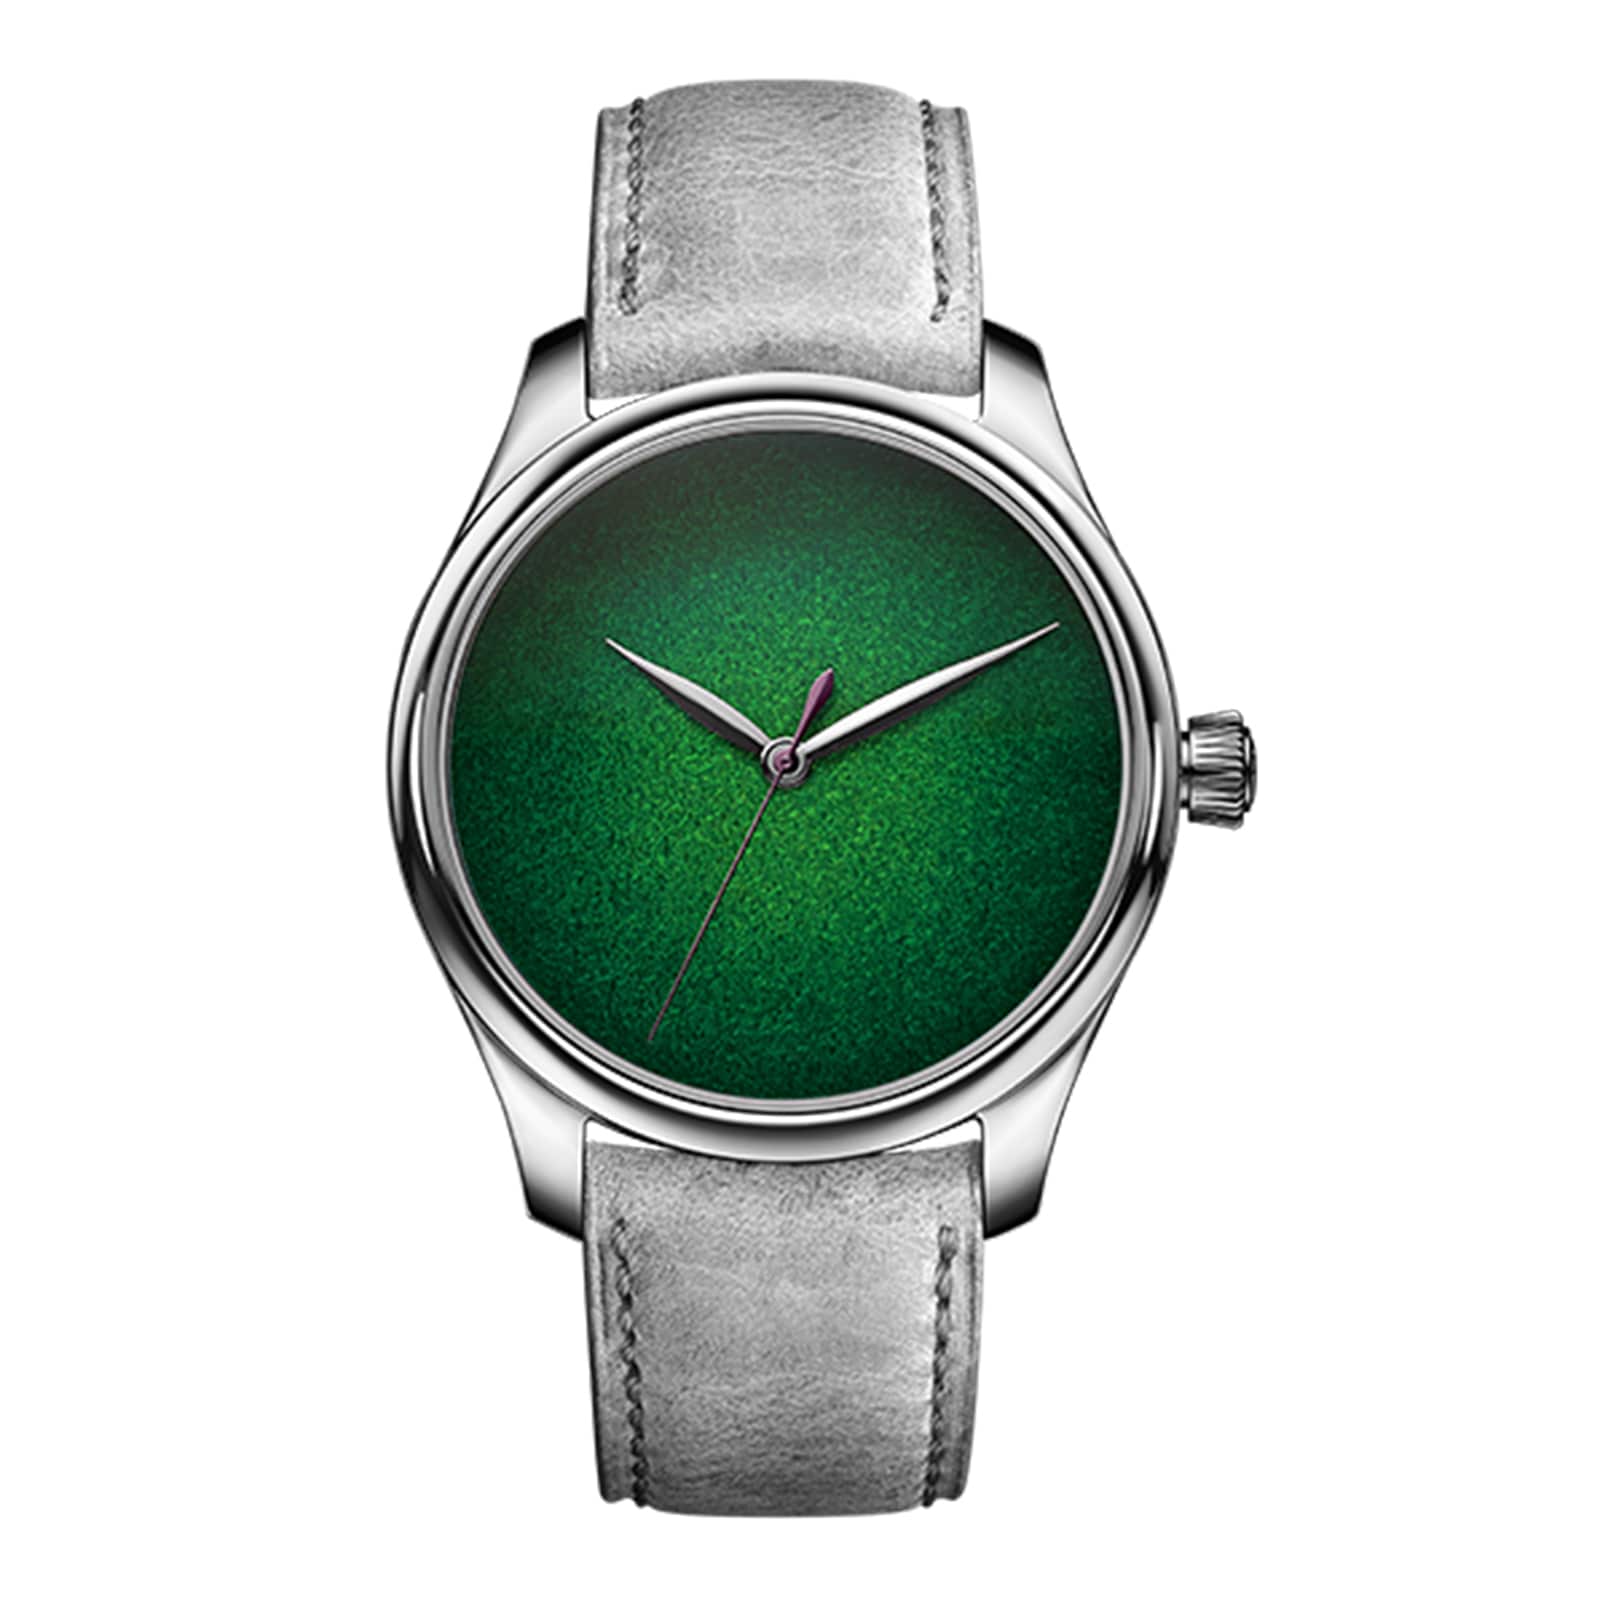 H. Moser & Cie Endeavour Centre Seconds Concept Lime Green Watch With  Hammered Enamel Dial | aBlogtoWatch